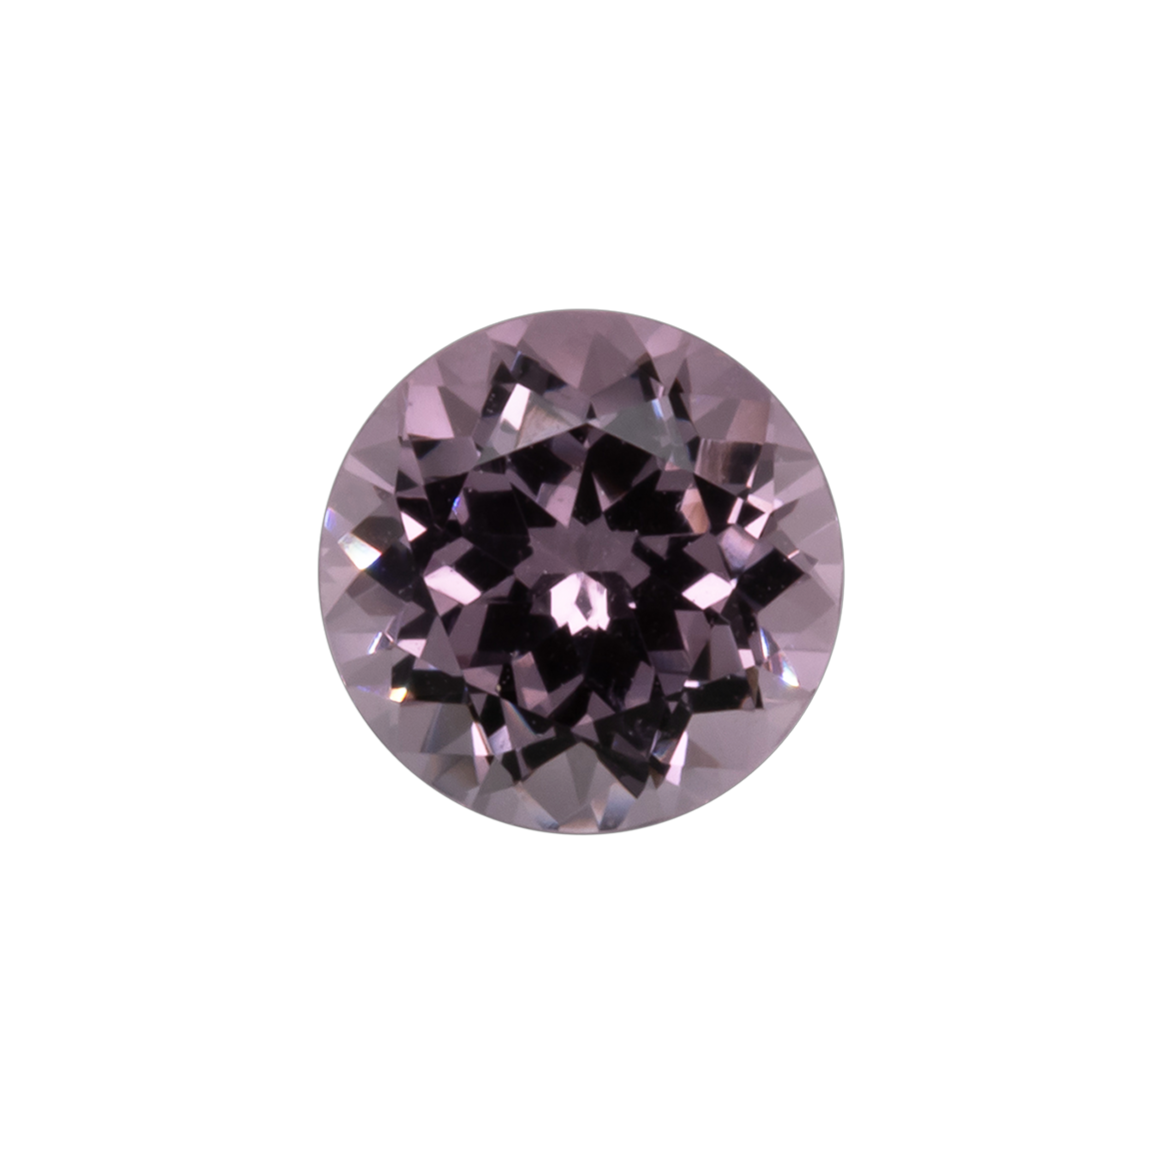 Spinell - rosa, rund, 5,1x5,1 mm, 0,58 cts, Nr. SP90003